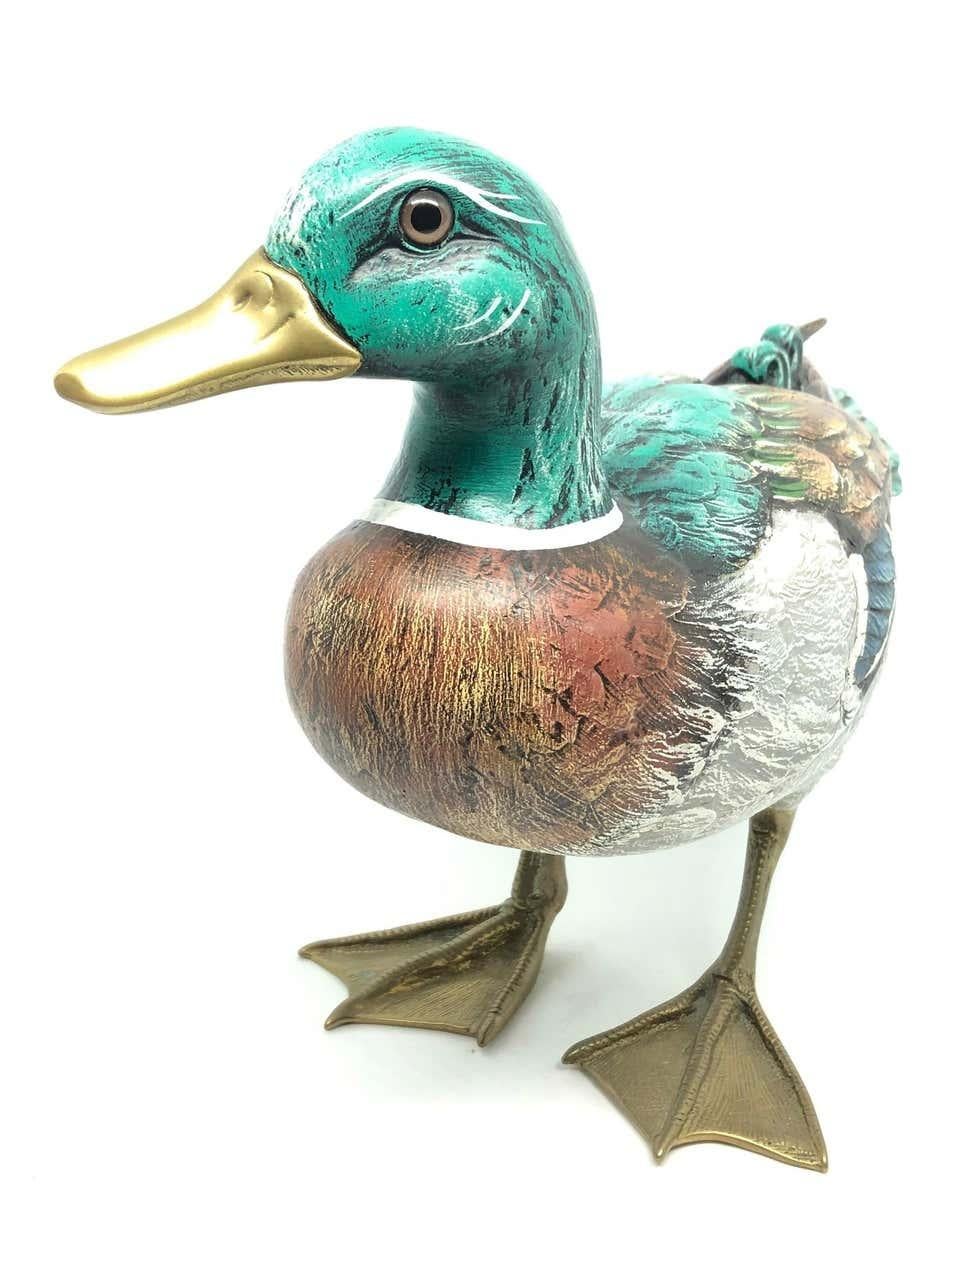 Vintage signed duck figurine by Elli Malevolti. It features a decoy type design with brass accented parts. It has glass eyes and a hand painted body. A nice addition to the Hollywood Regency interior. Signed Malevolti Italy. The duck measures